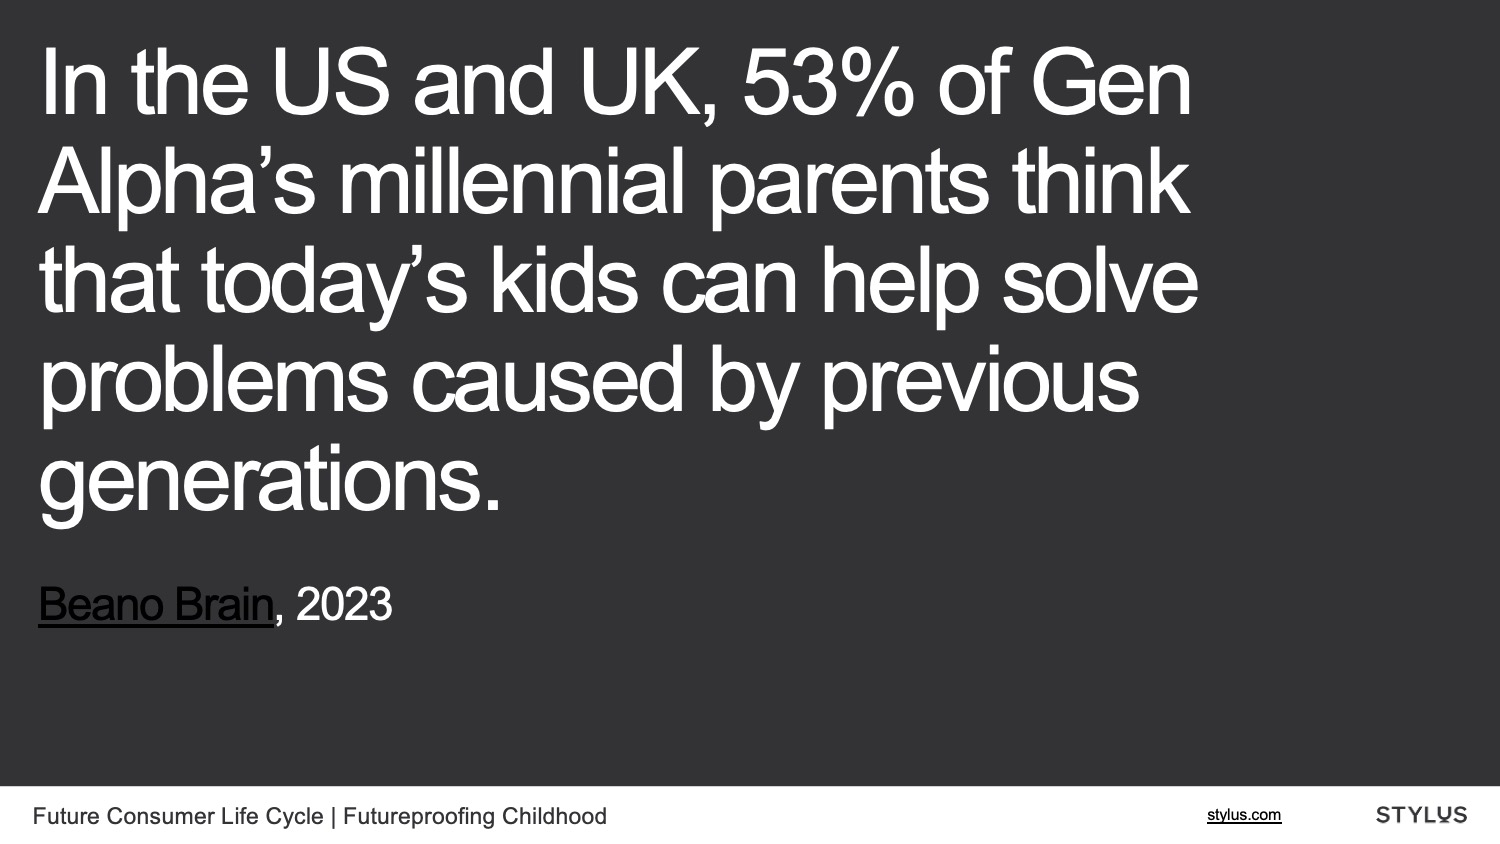 53% of gen alpha's parents think today's kids can help solve problems caused by previous genarations.